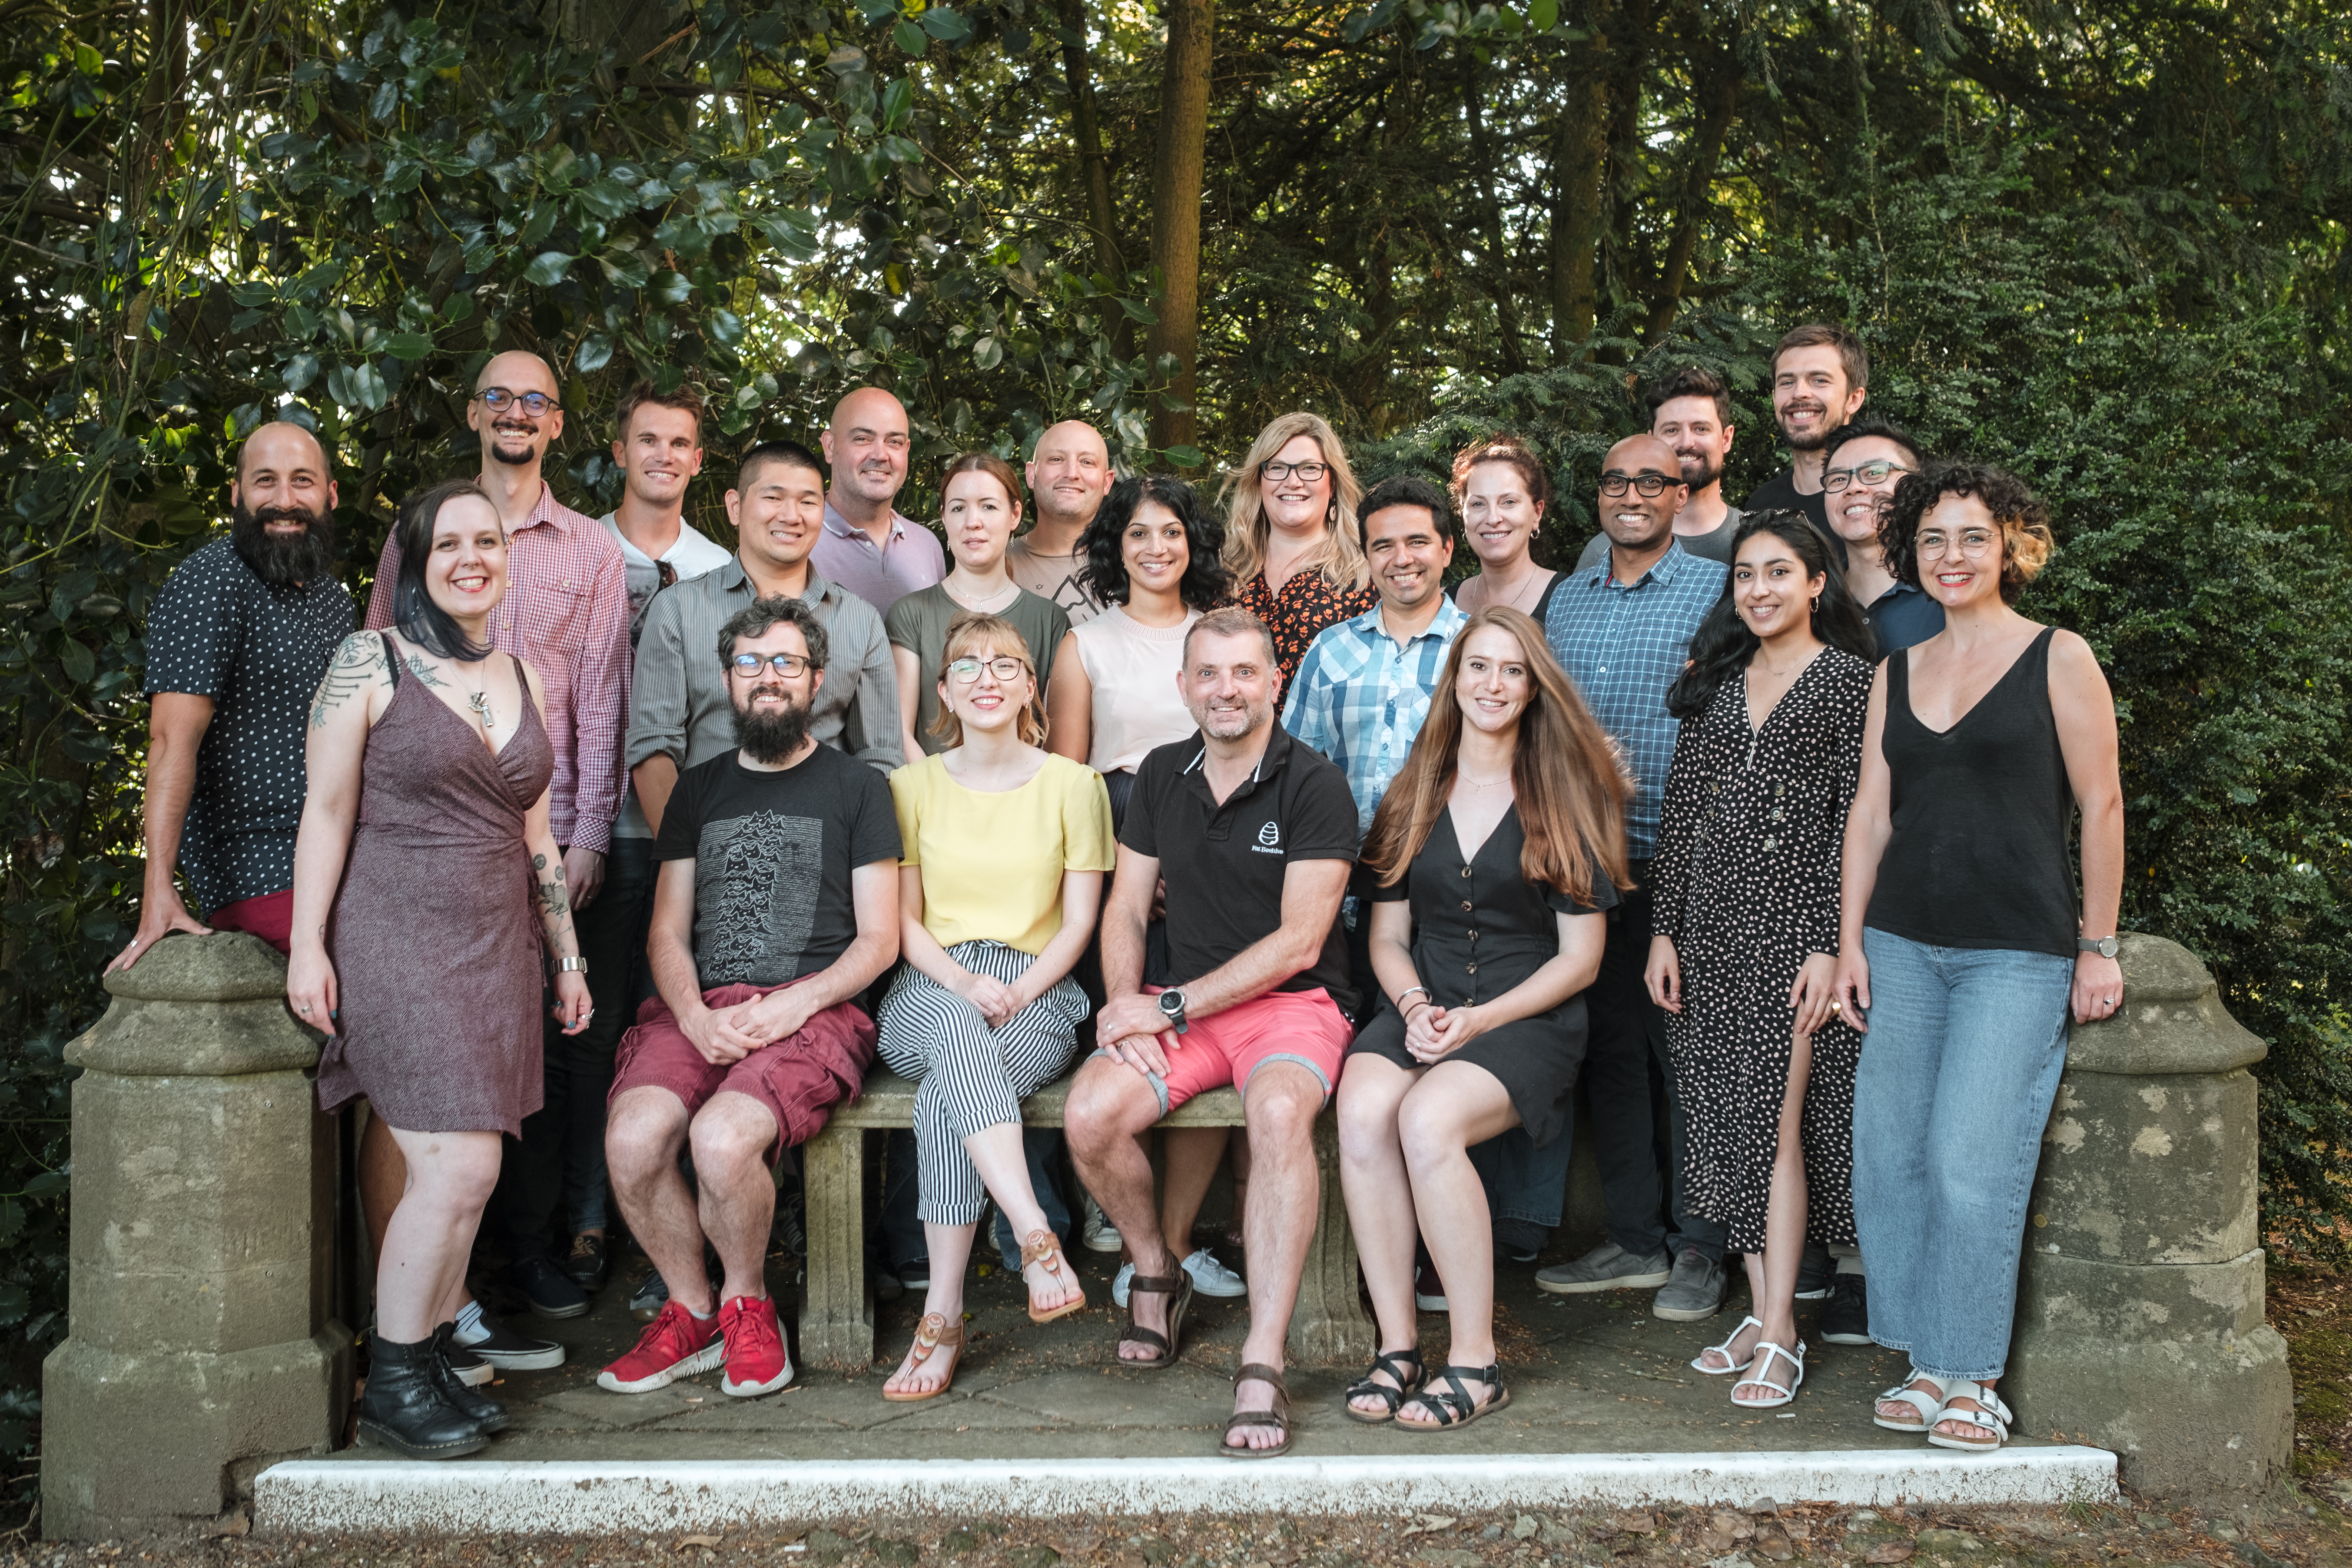 Fat Beehive team photo at away days 2019